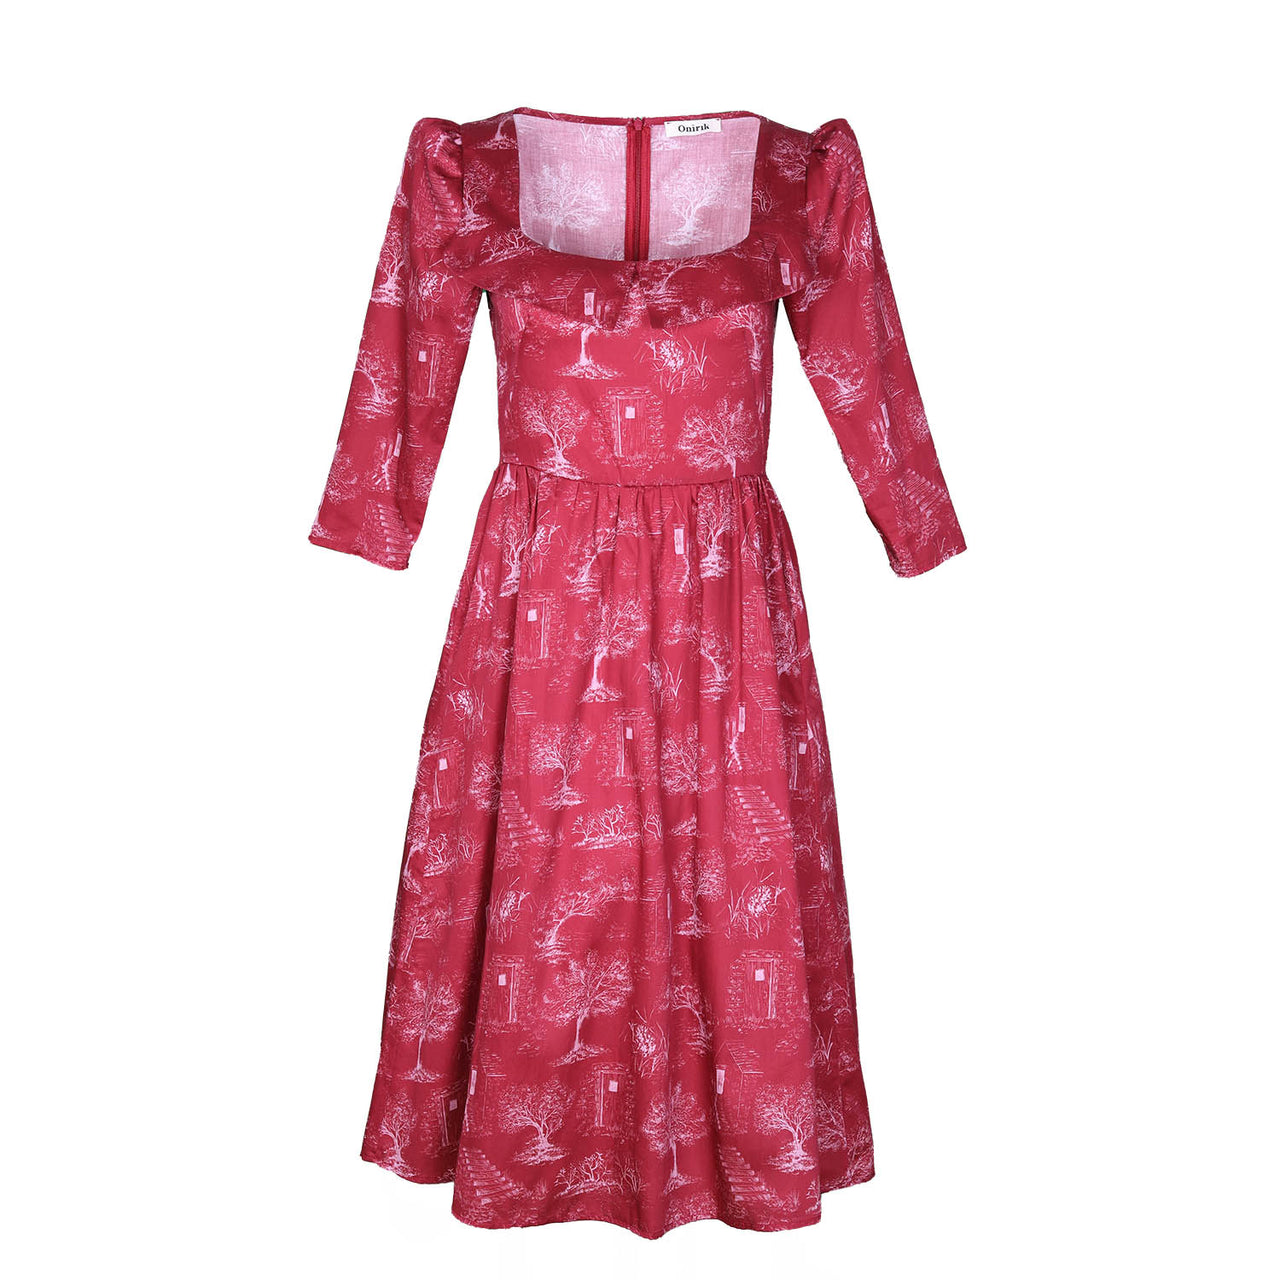 Marisol Dress / Ruby Red + Alabaster Toile Cotton